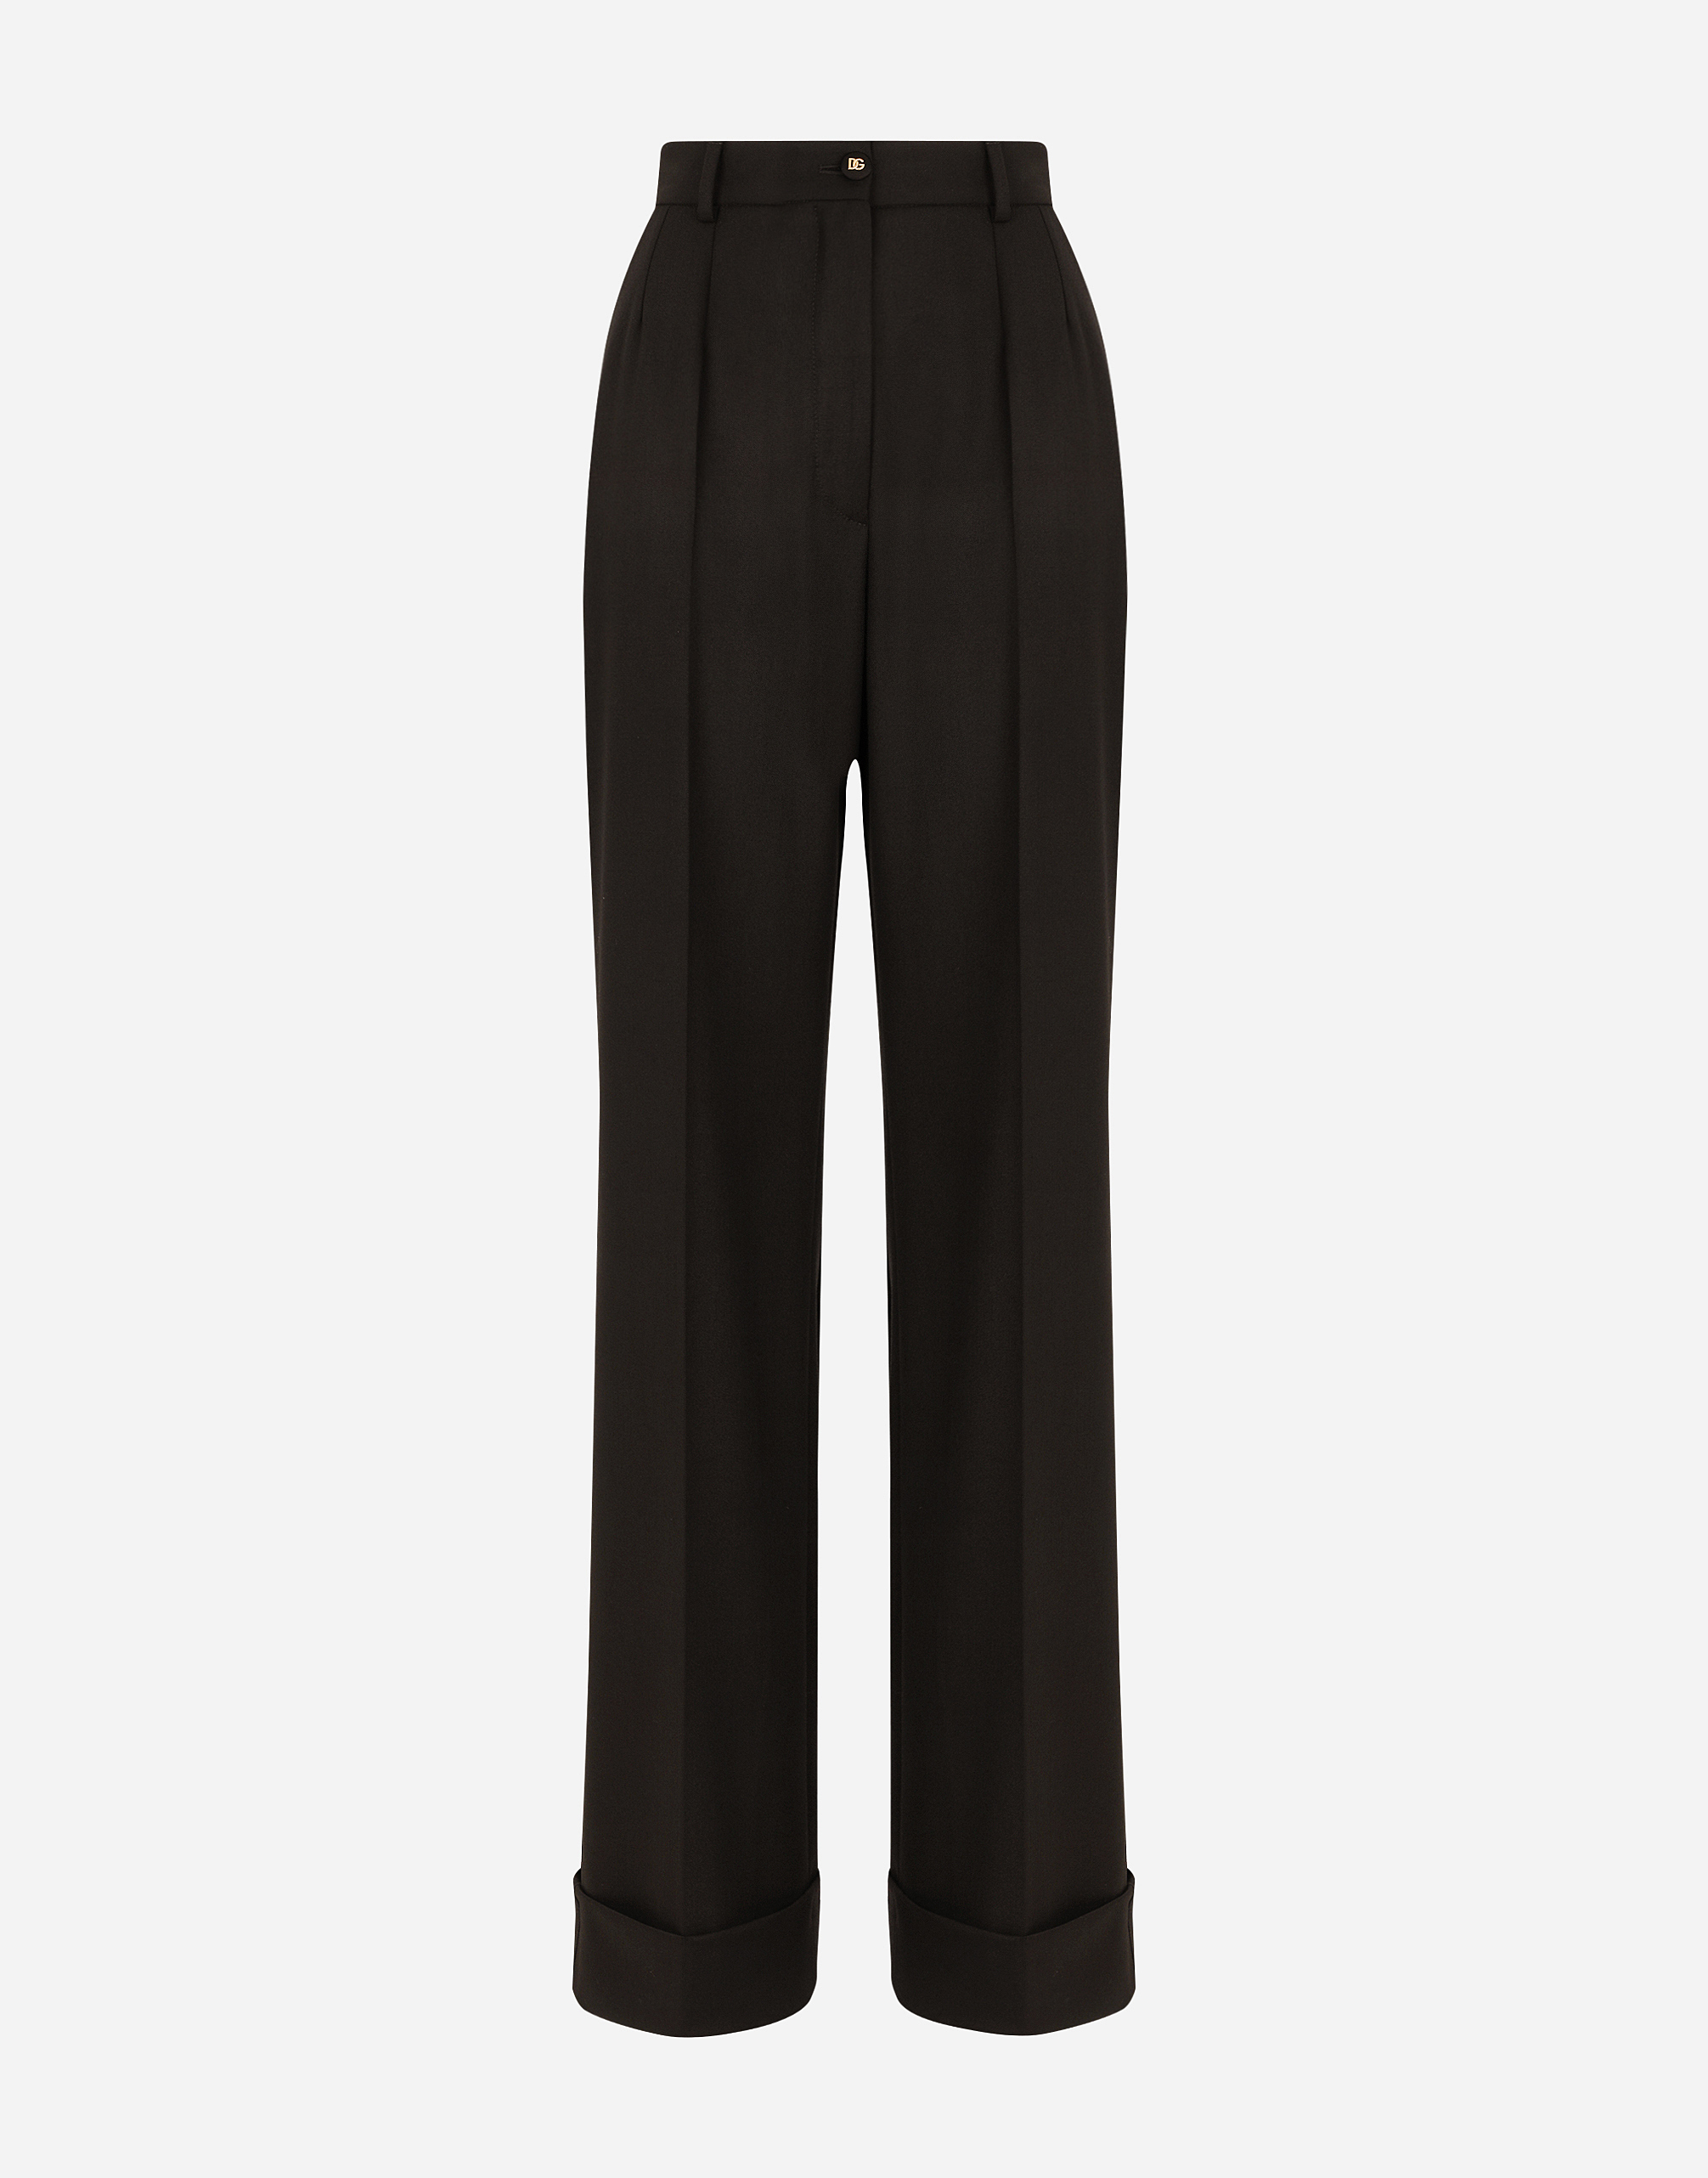 Woolen palazzo pants with turn-ups in Black